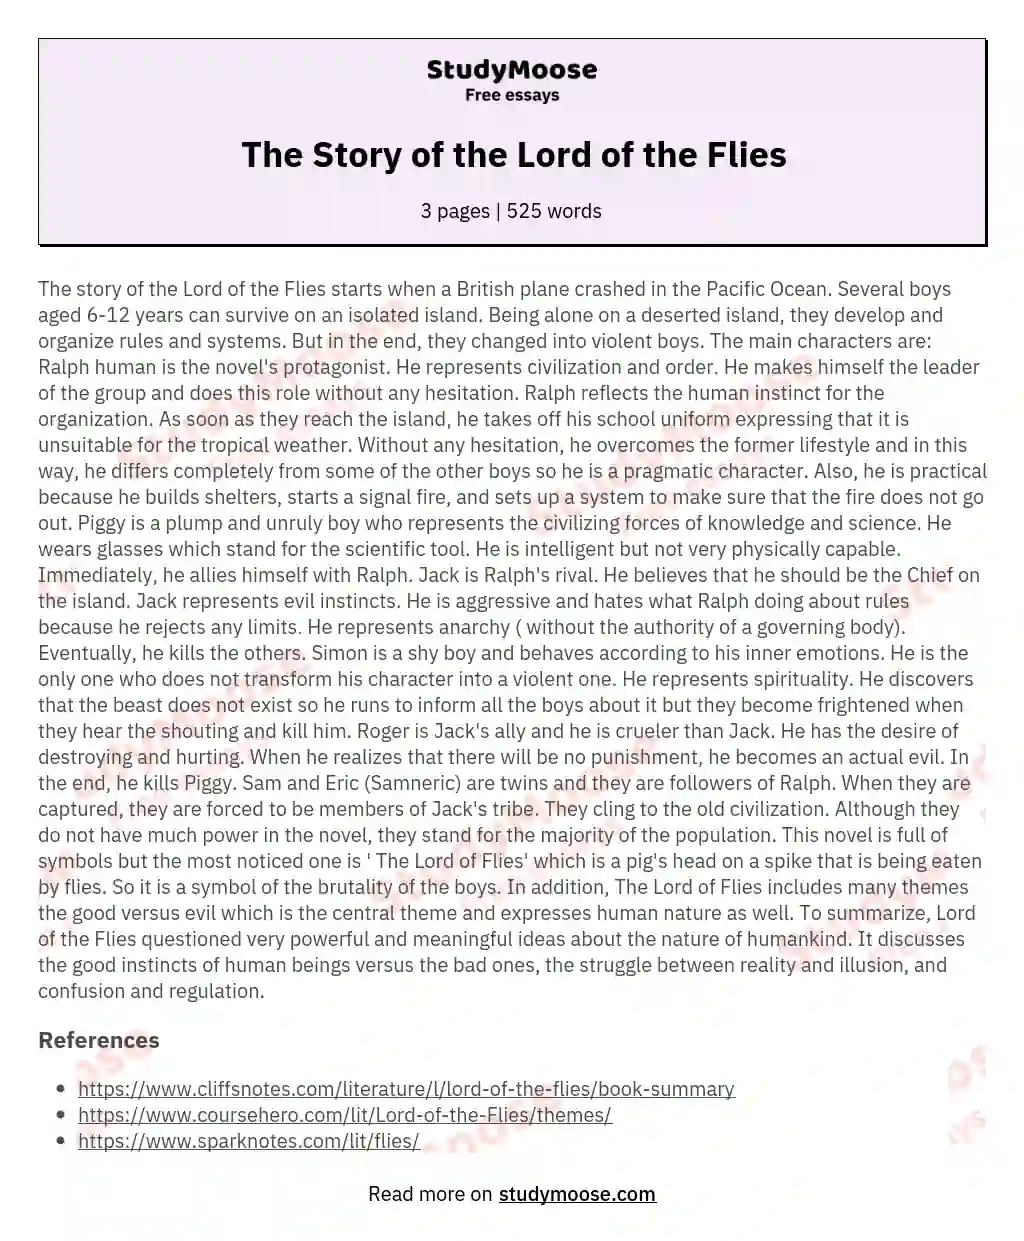 The Story of the Lord of the Flies essay